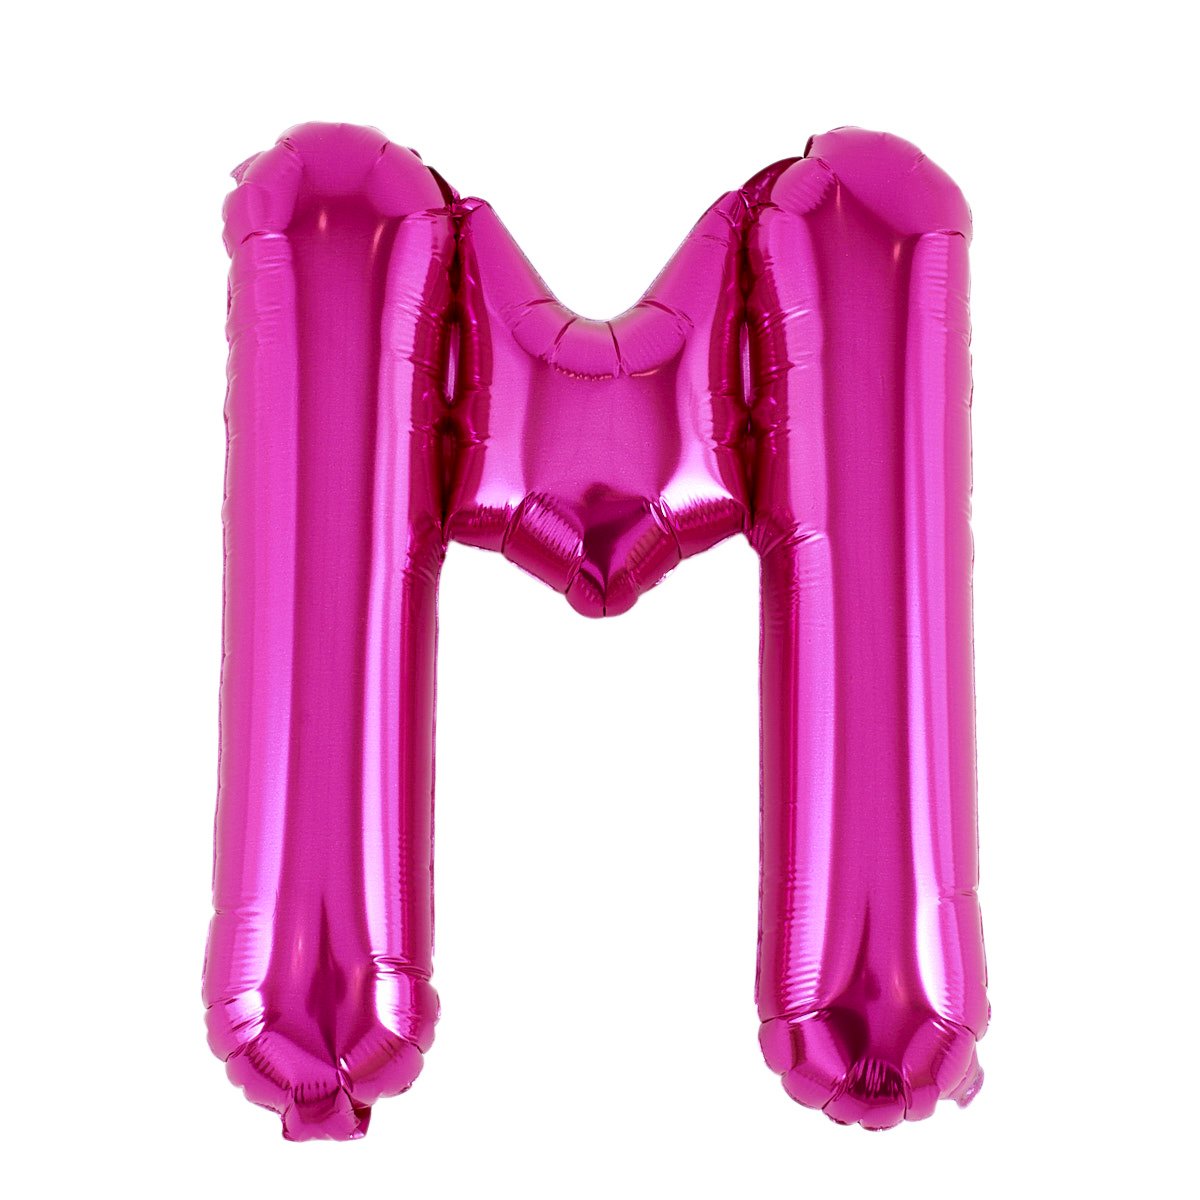 Pink Letter M Air-Inflated Balloon